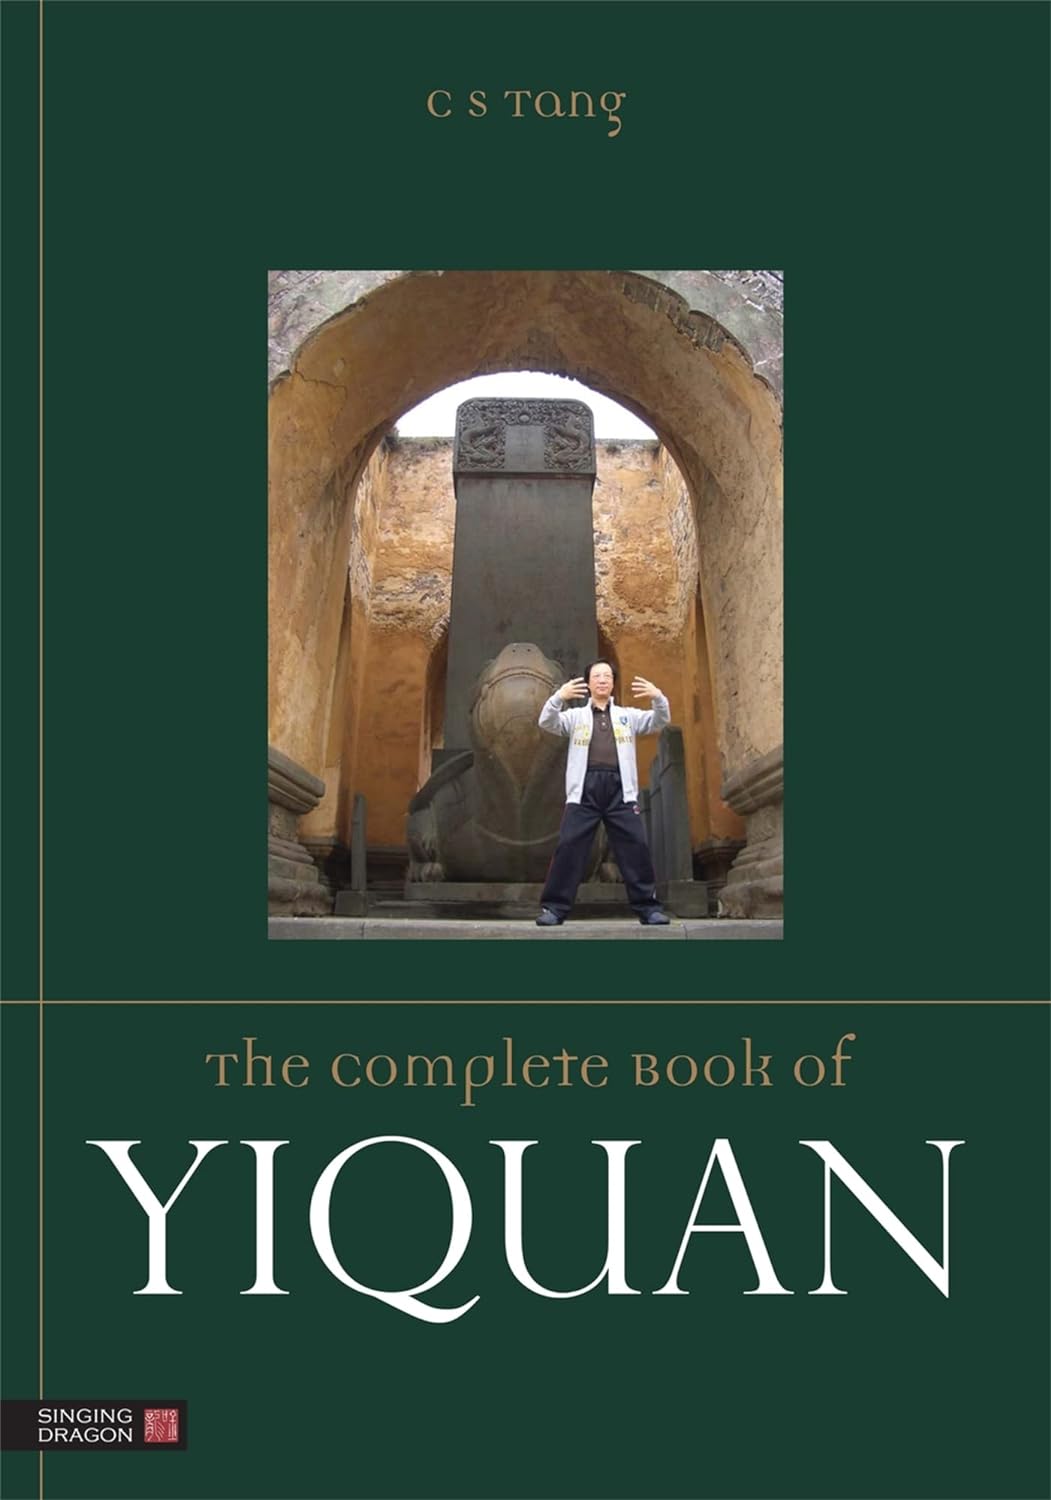 The Complete Book of Yiquan by CS Tang